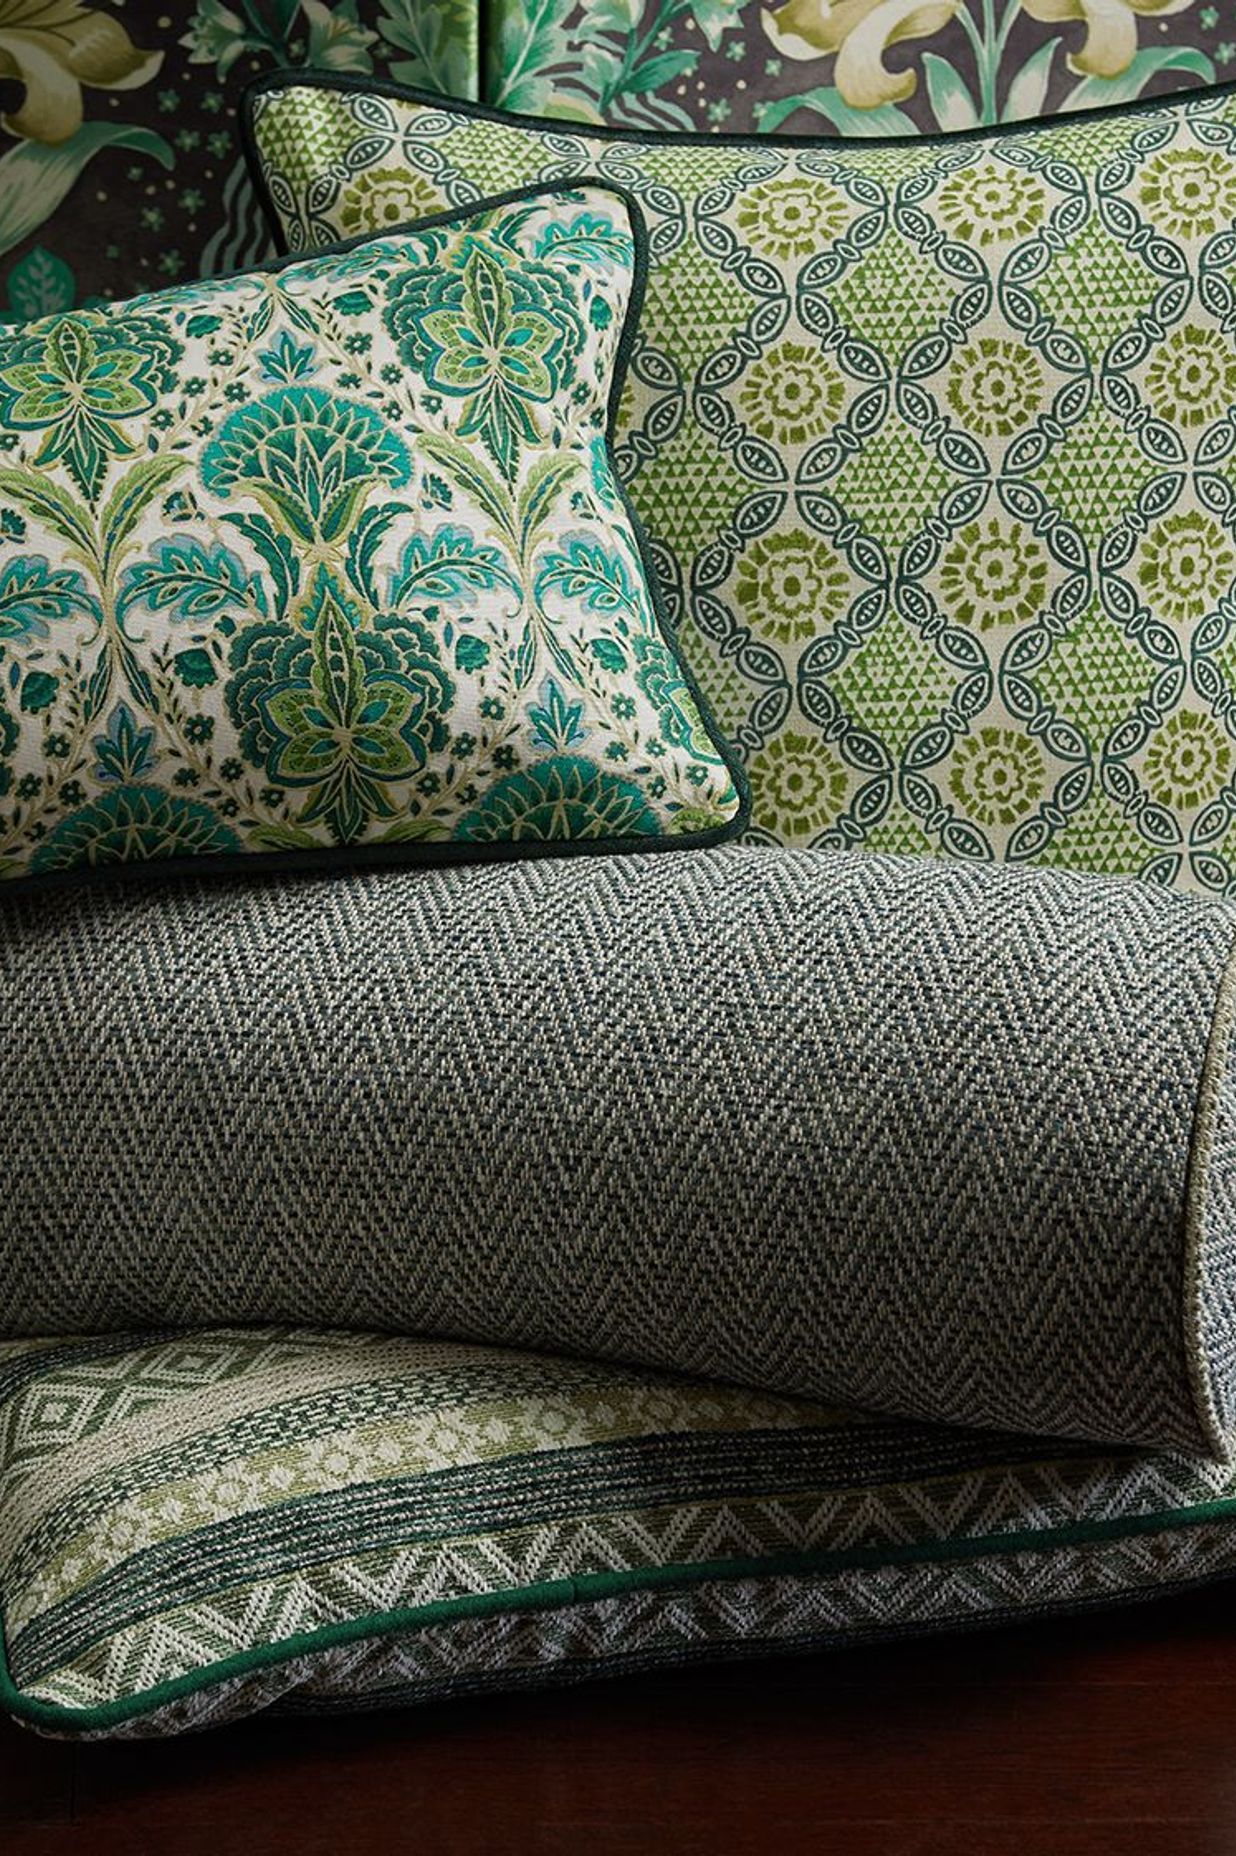 Green and jewel-toned patterns are having a moment in the interior design world.